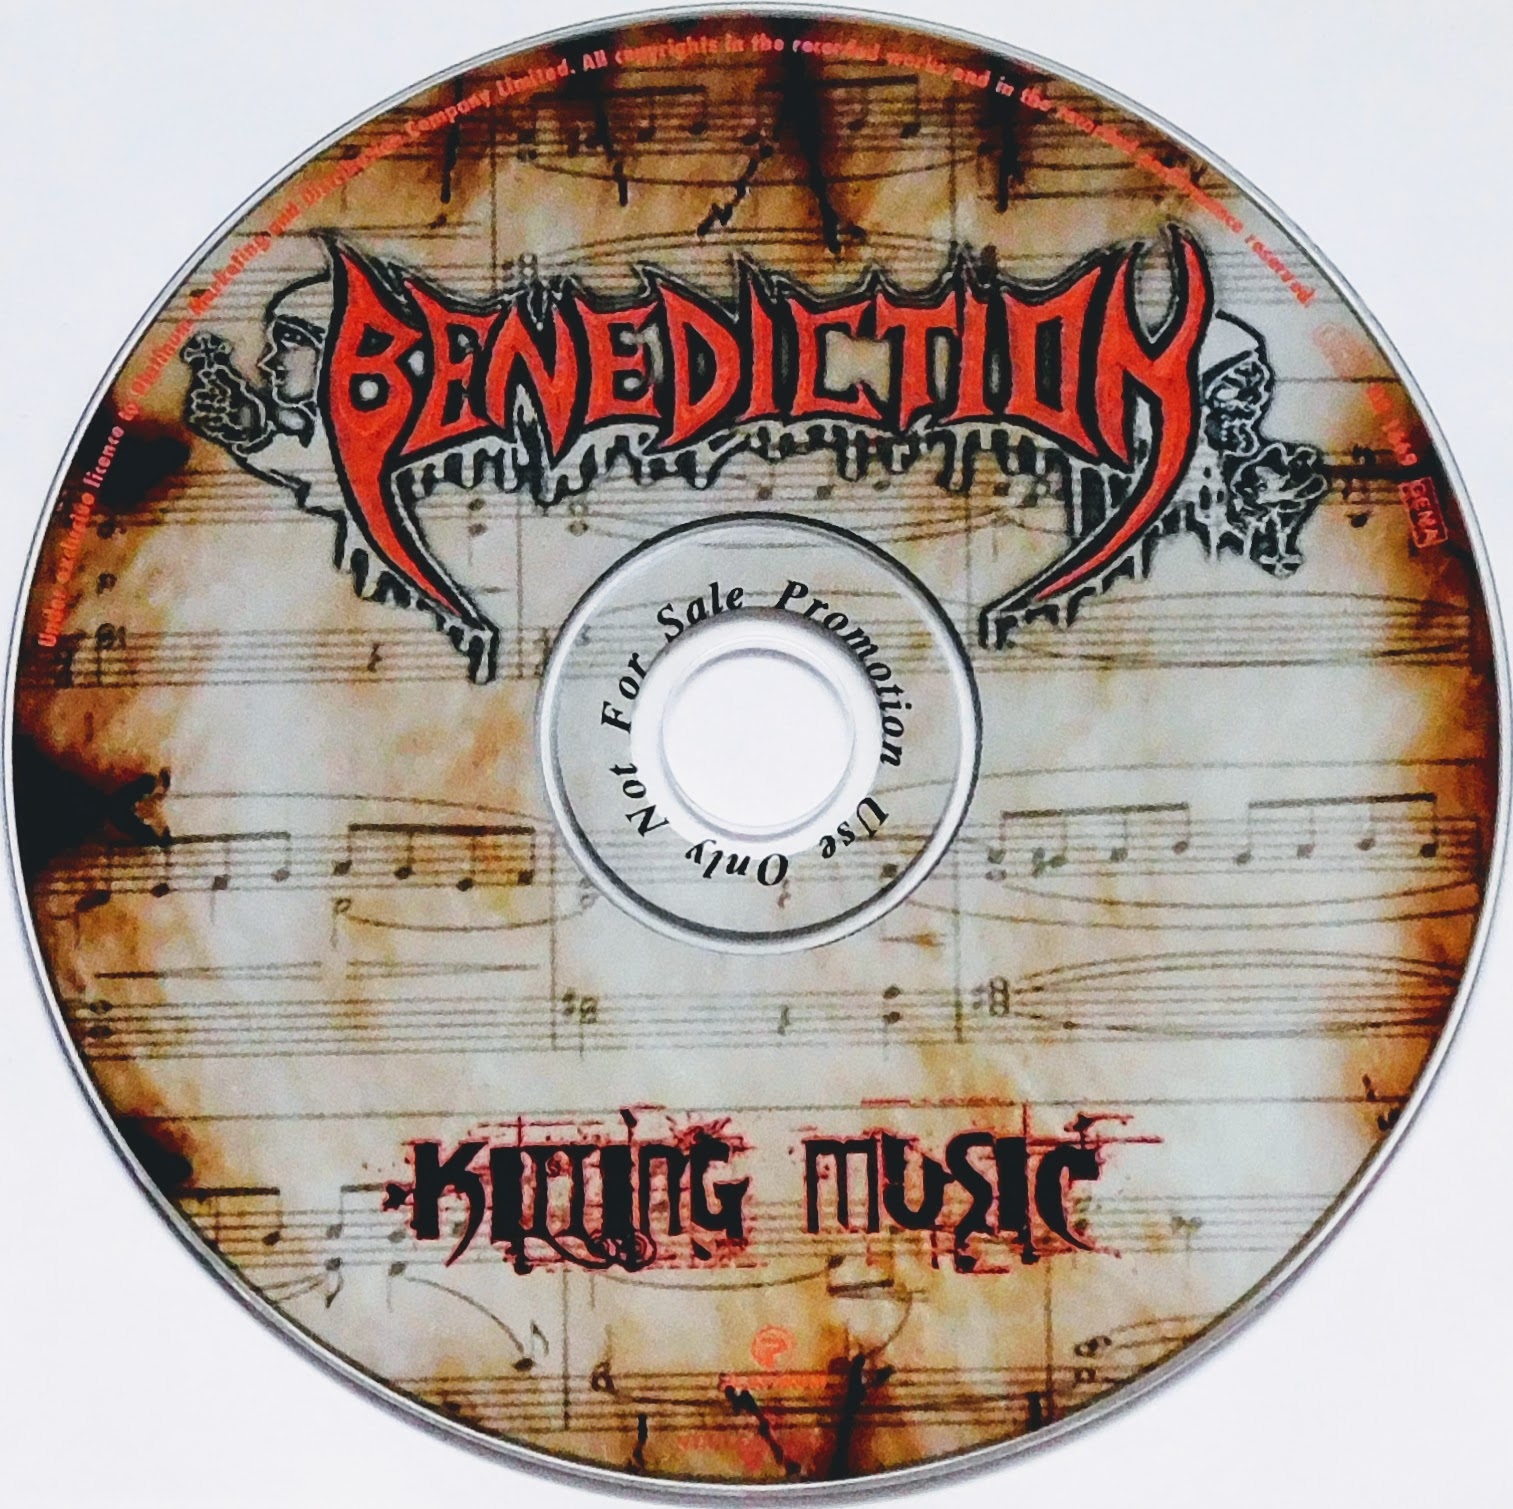 CD (Promotion) Benediction - Killing Music (CD Only)